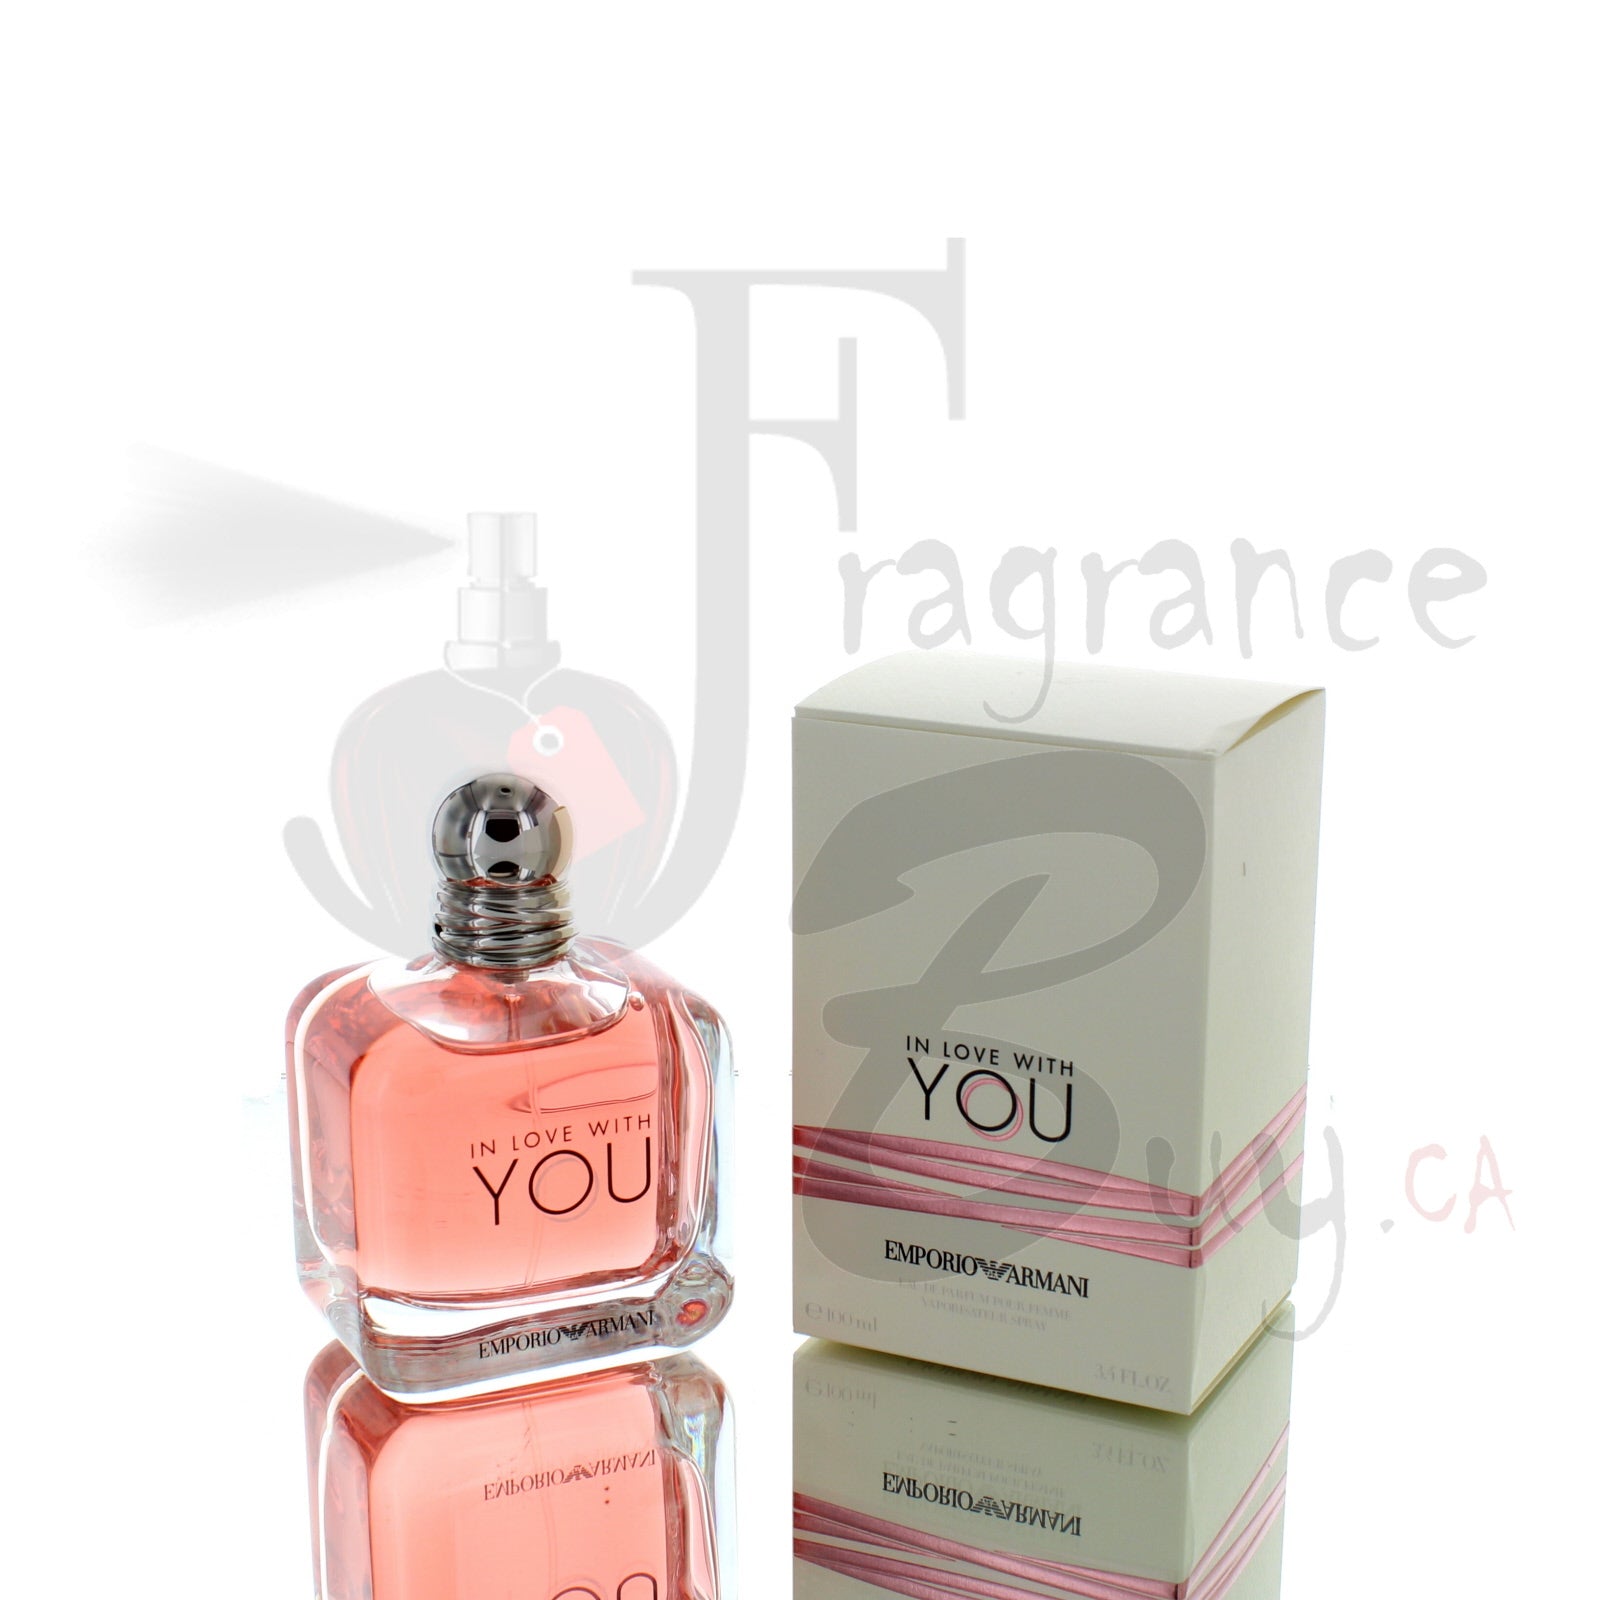 emporio armani in love with you review